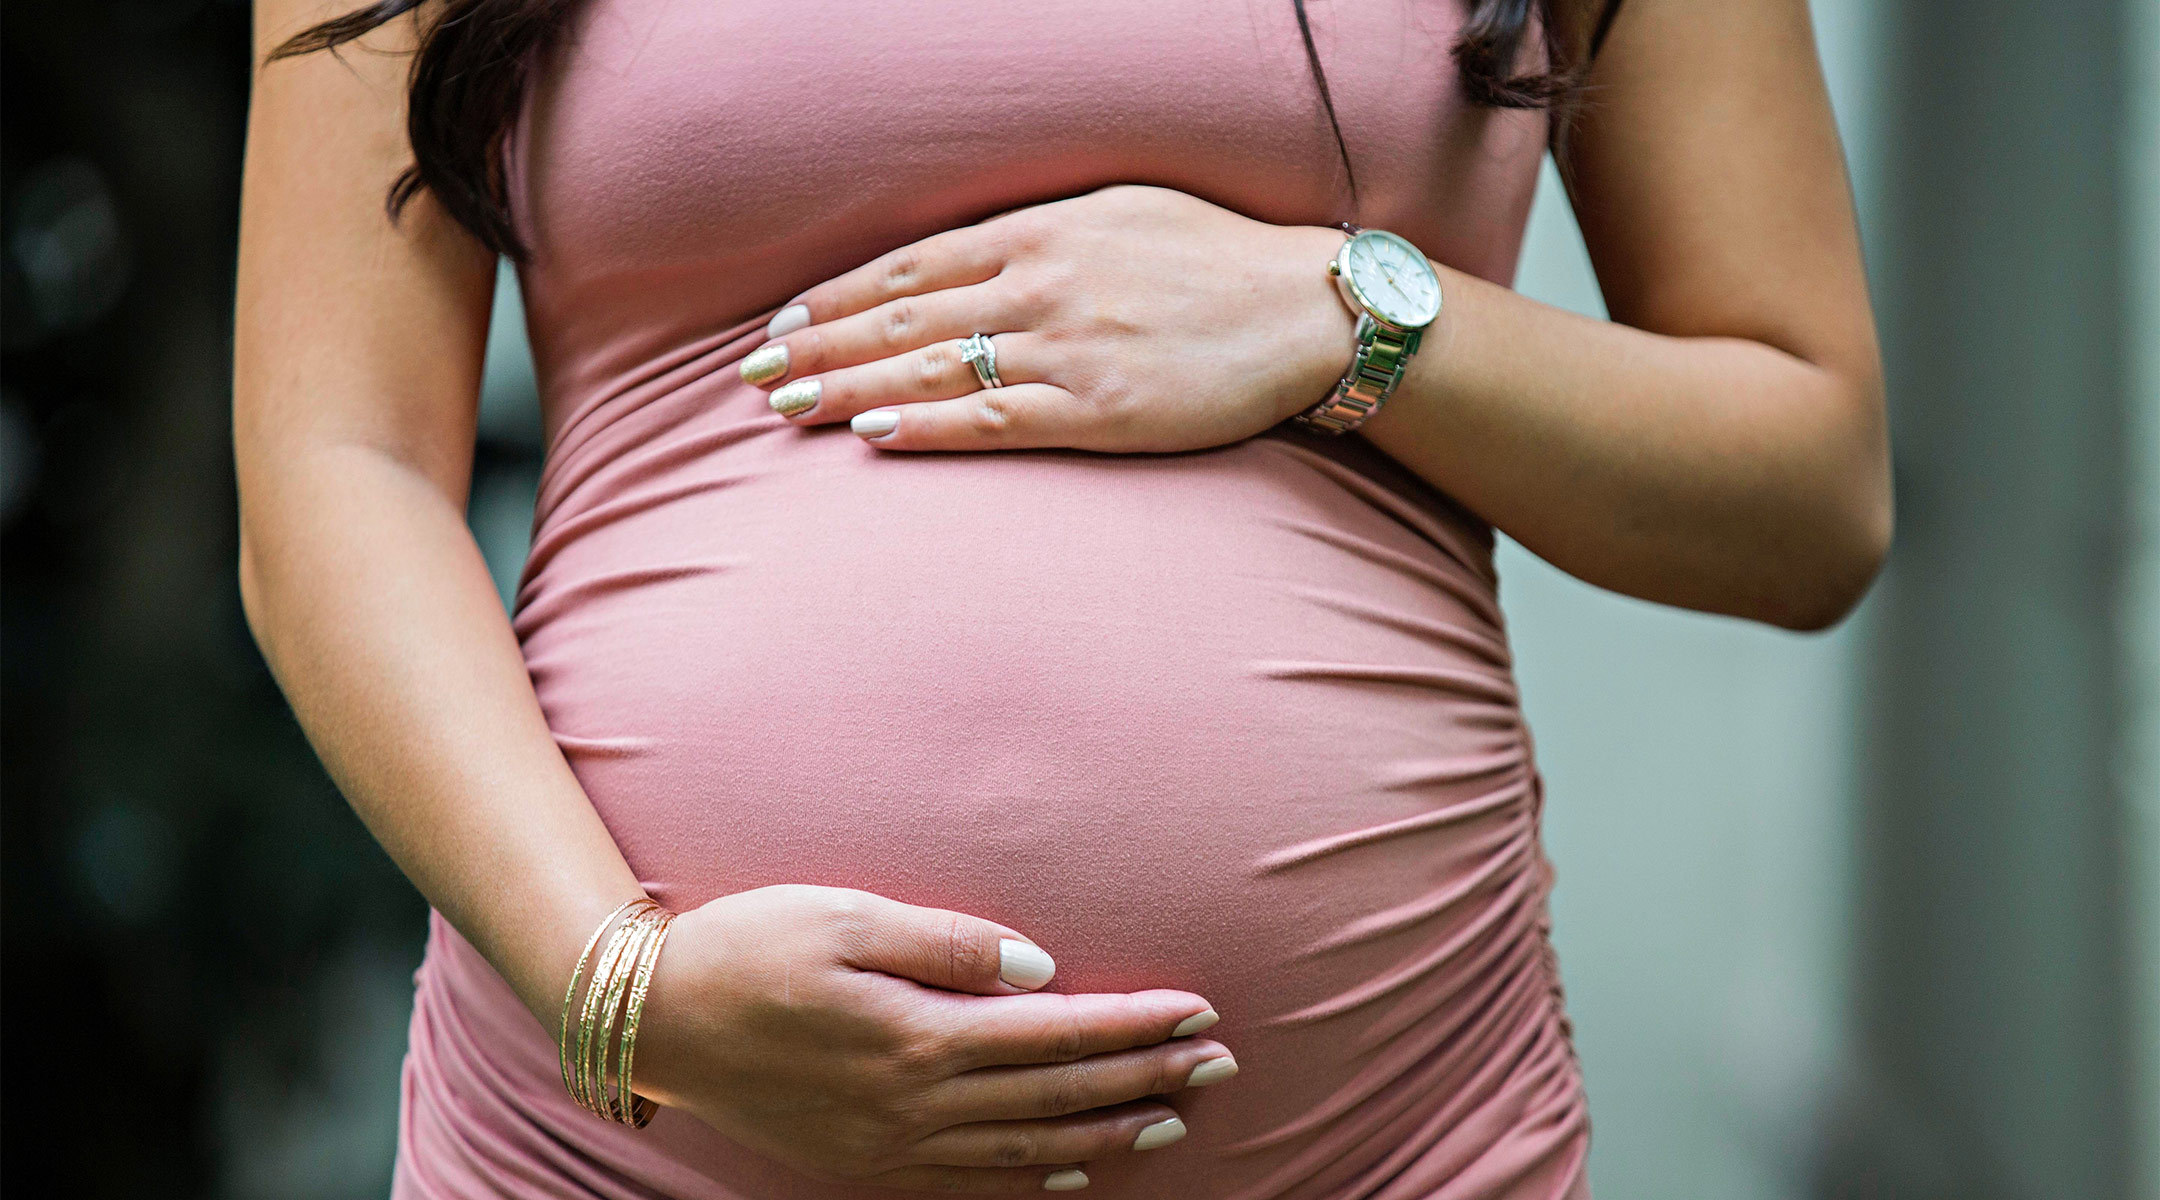 pregnant woman with her hands on her belly wearing a pink dress